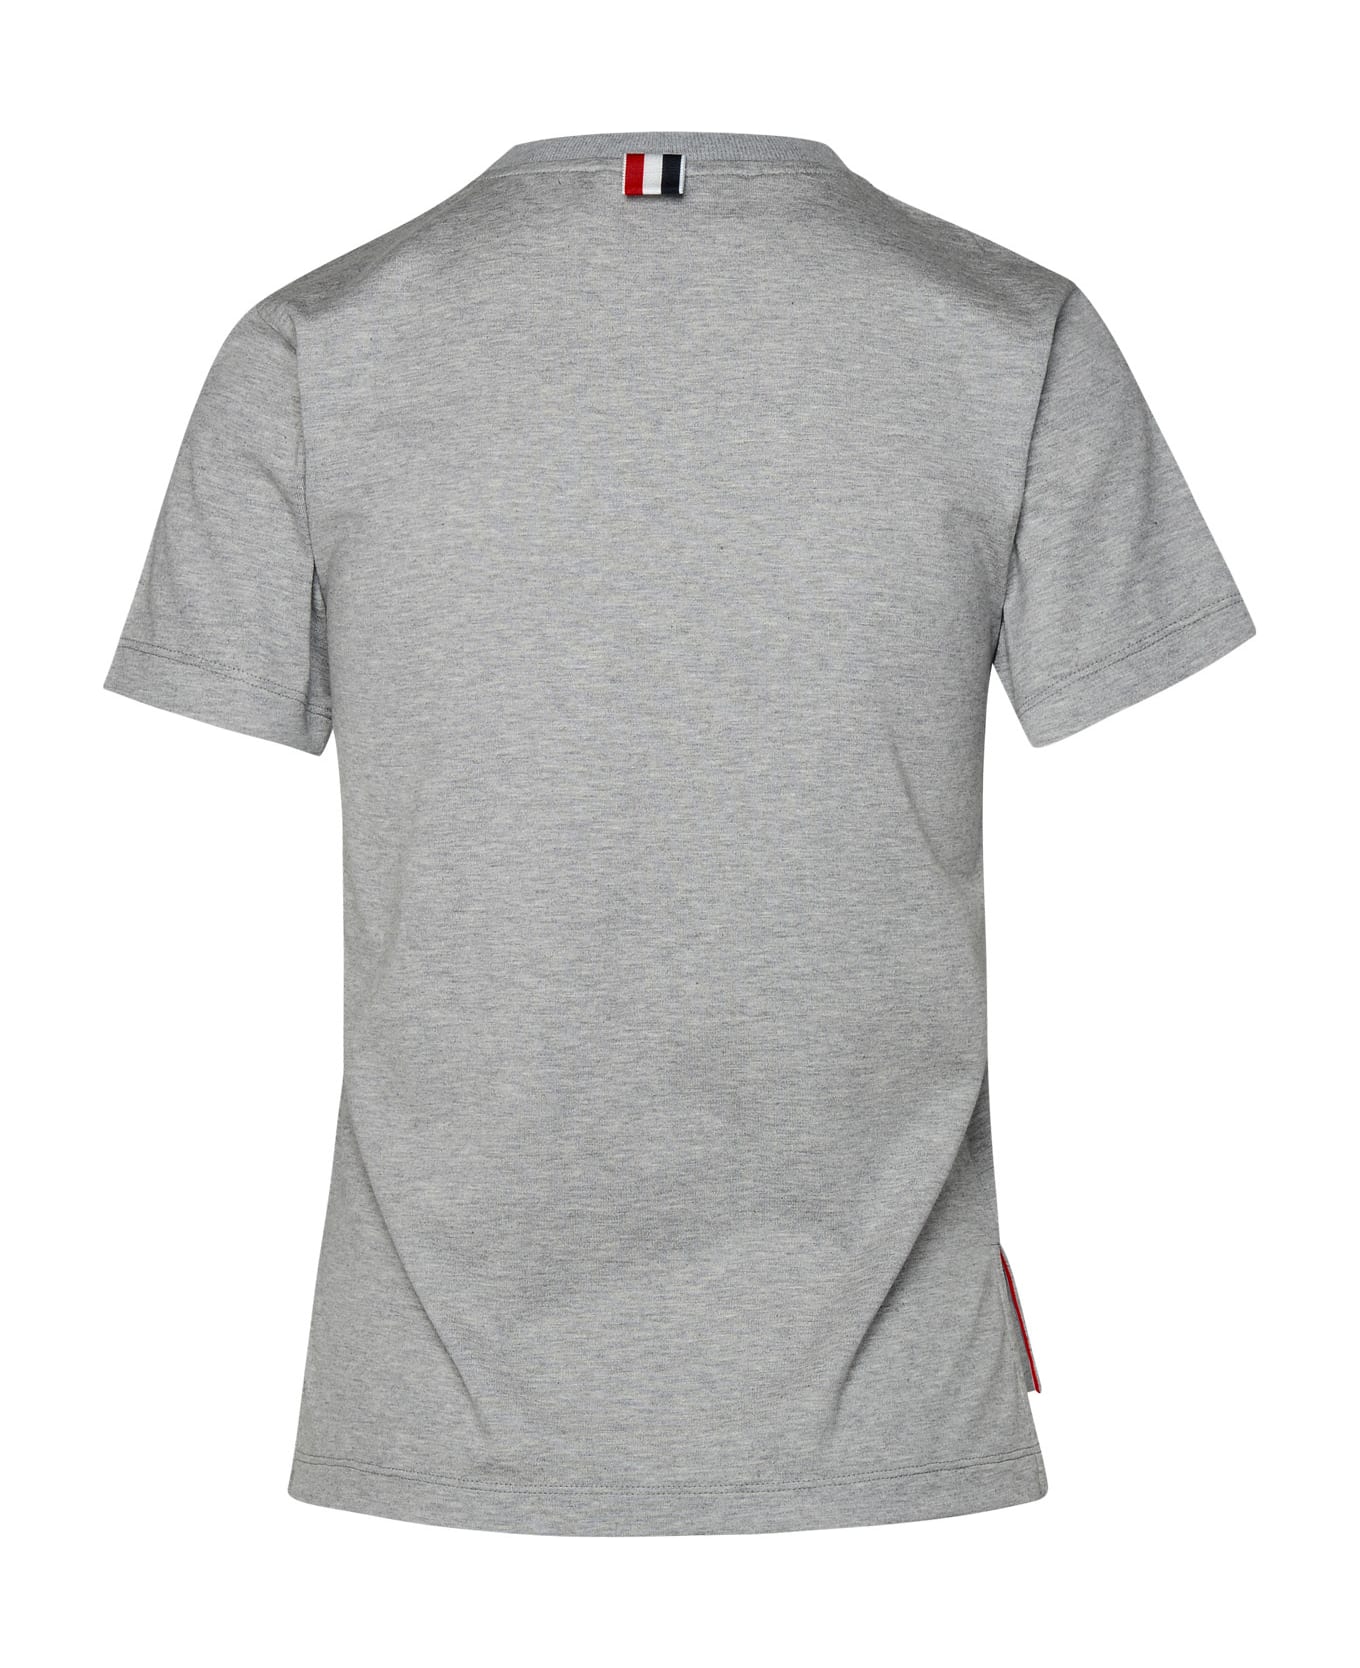 Thom Browne 'relaxed' Grey Cotton T-shirt - LIGHT GREY Tシャツ